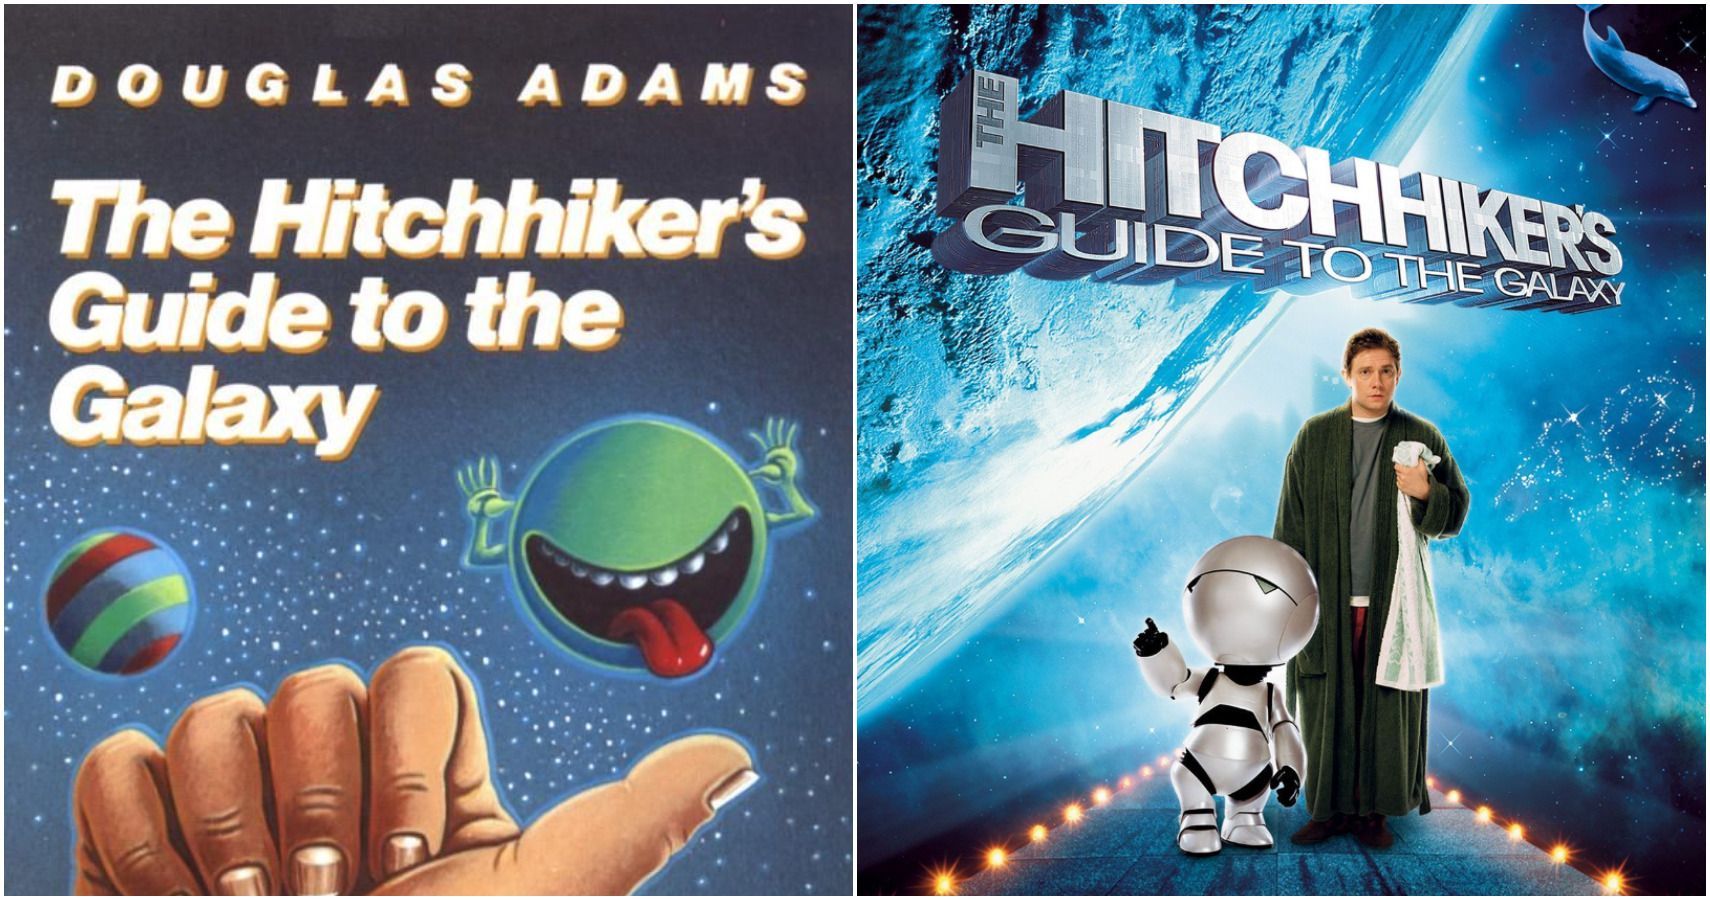 The Hitchhiker's Guide to the Galaxy (video game), Hitchhikers